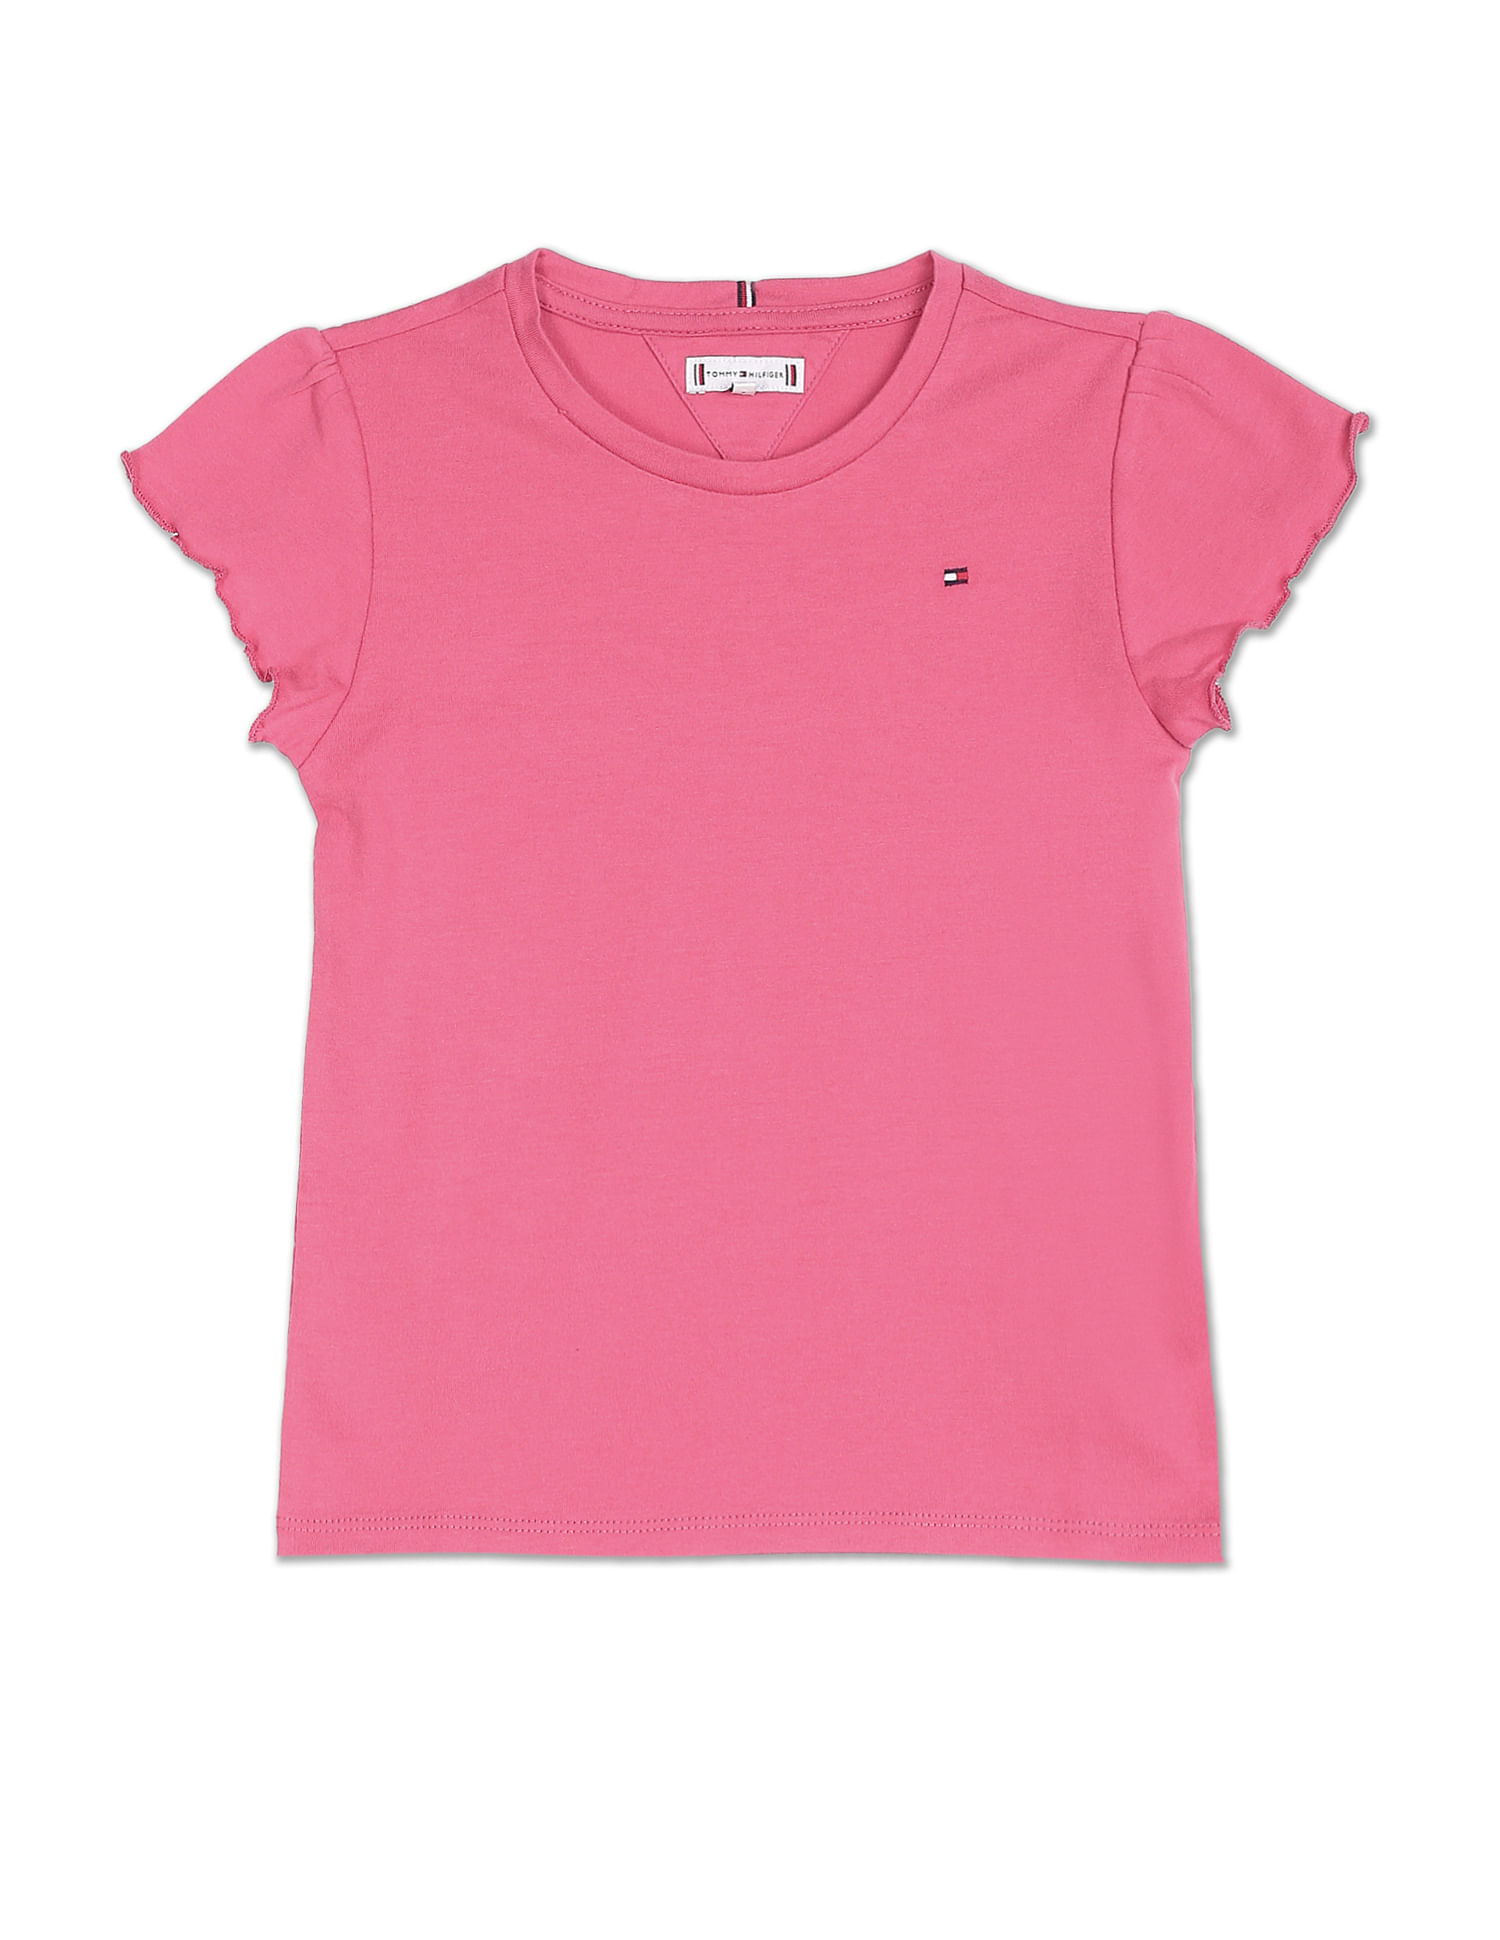 Kids Sleeve Tommy Cotton Essential Hilfiger Ruffle Buy T-Shirt